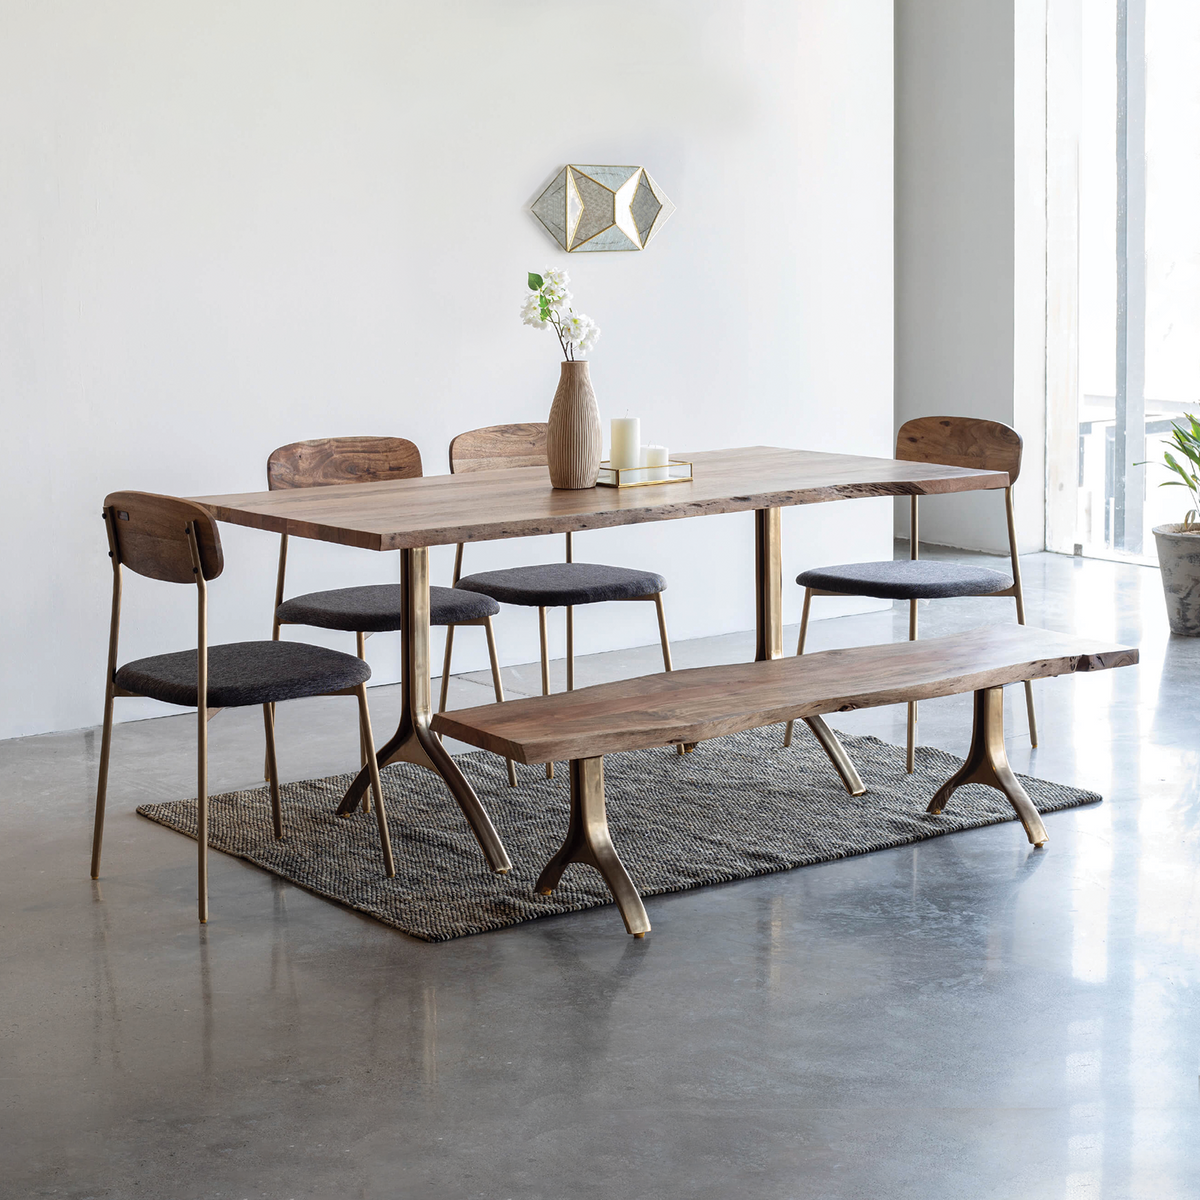 Yoho Dining Table With 4 Chairs and Bench